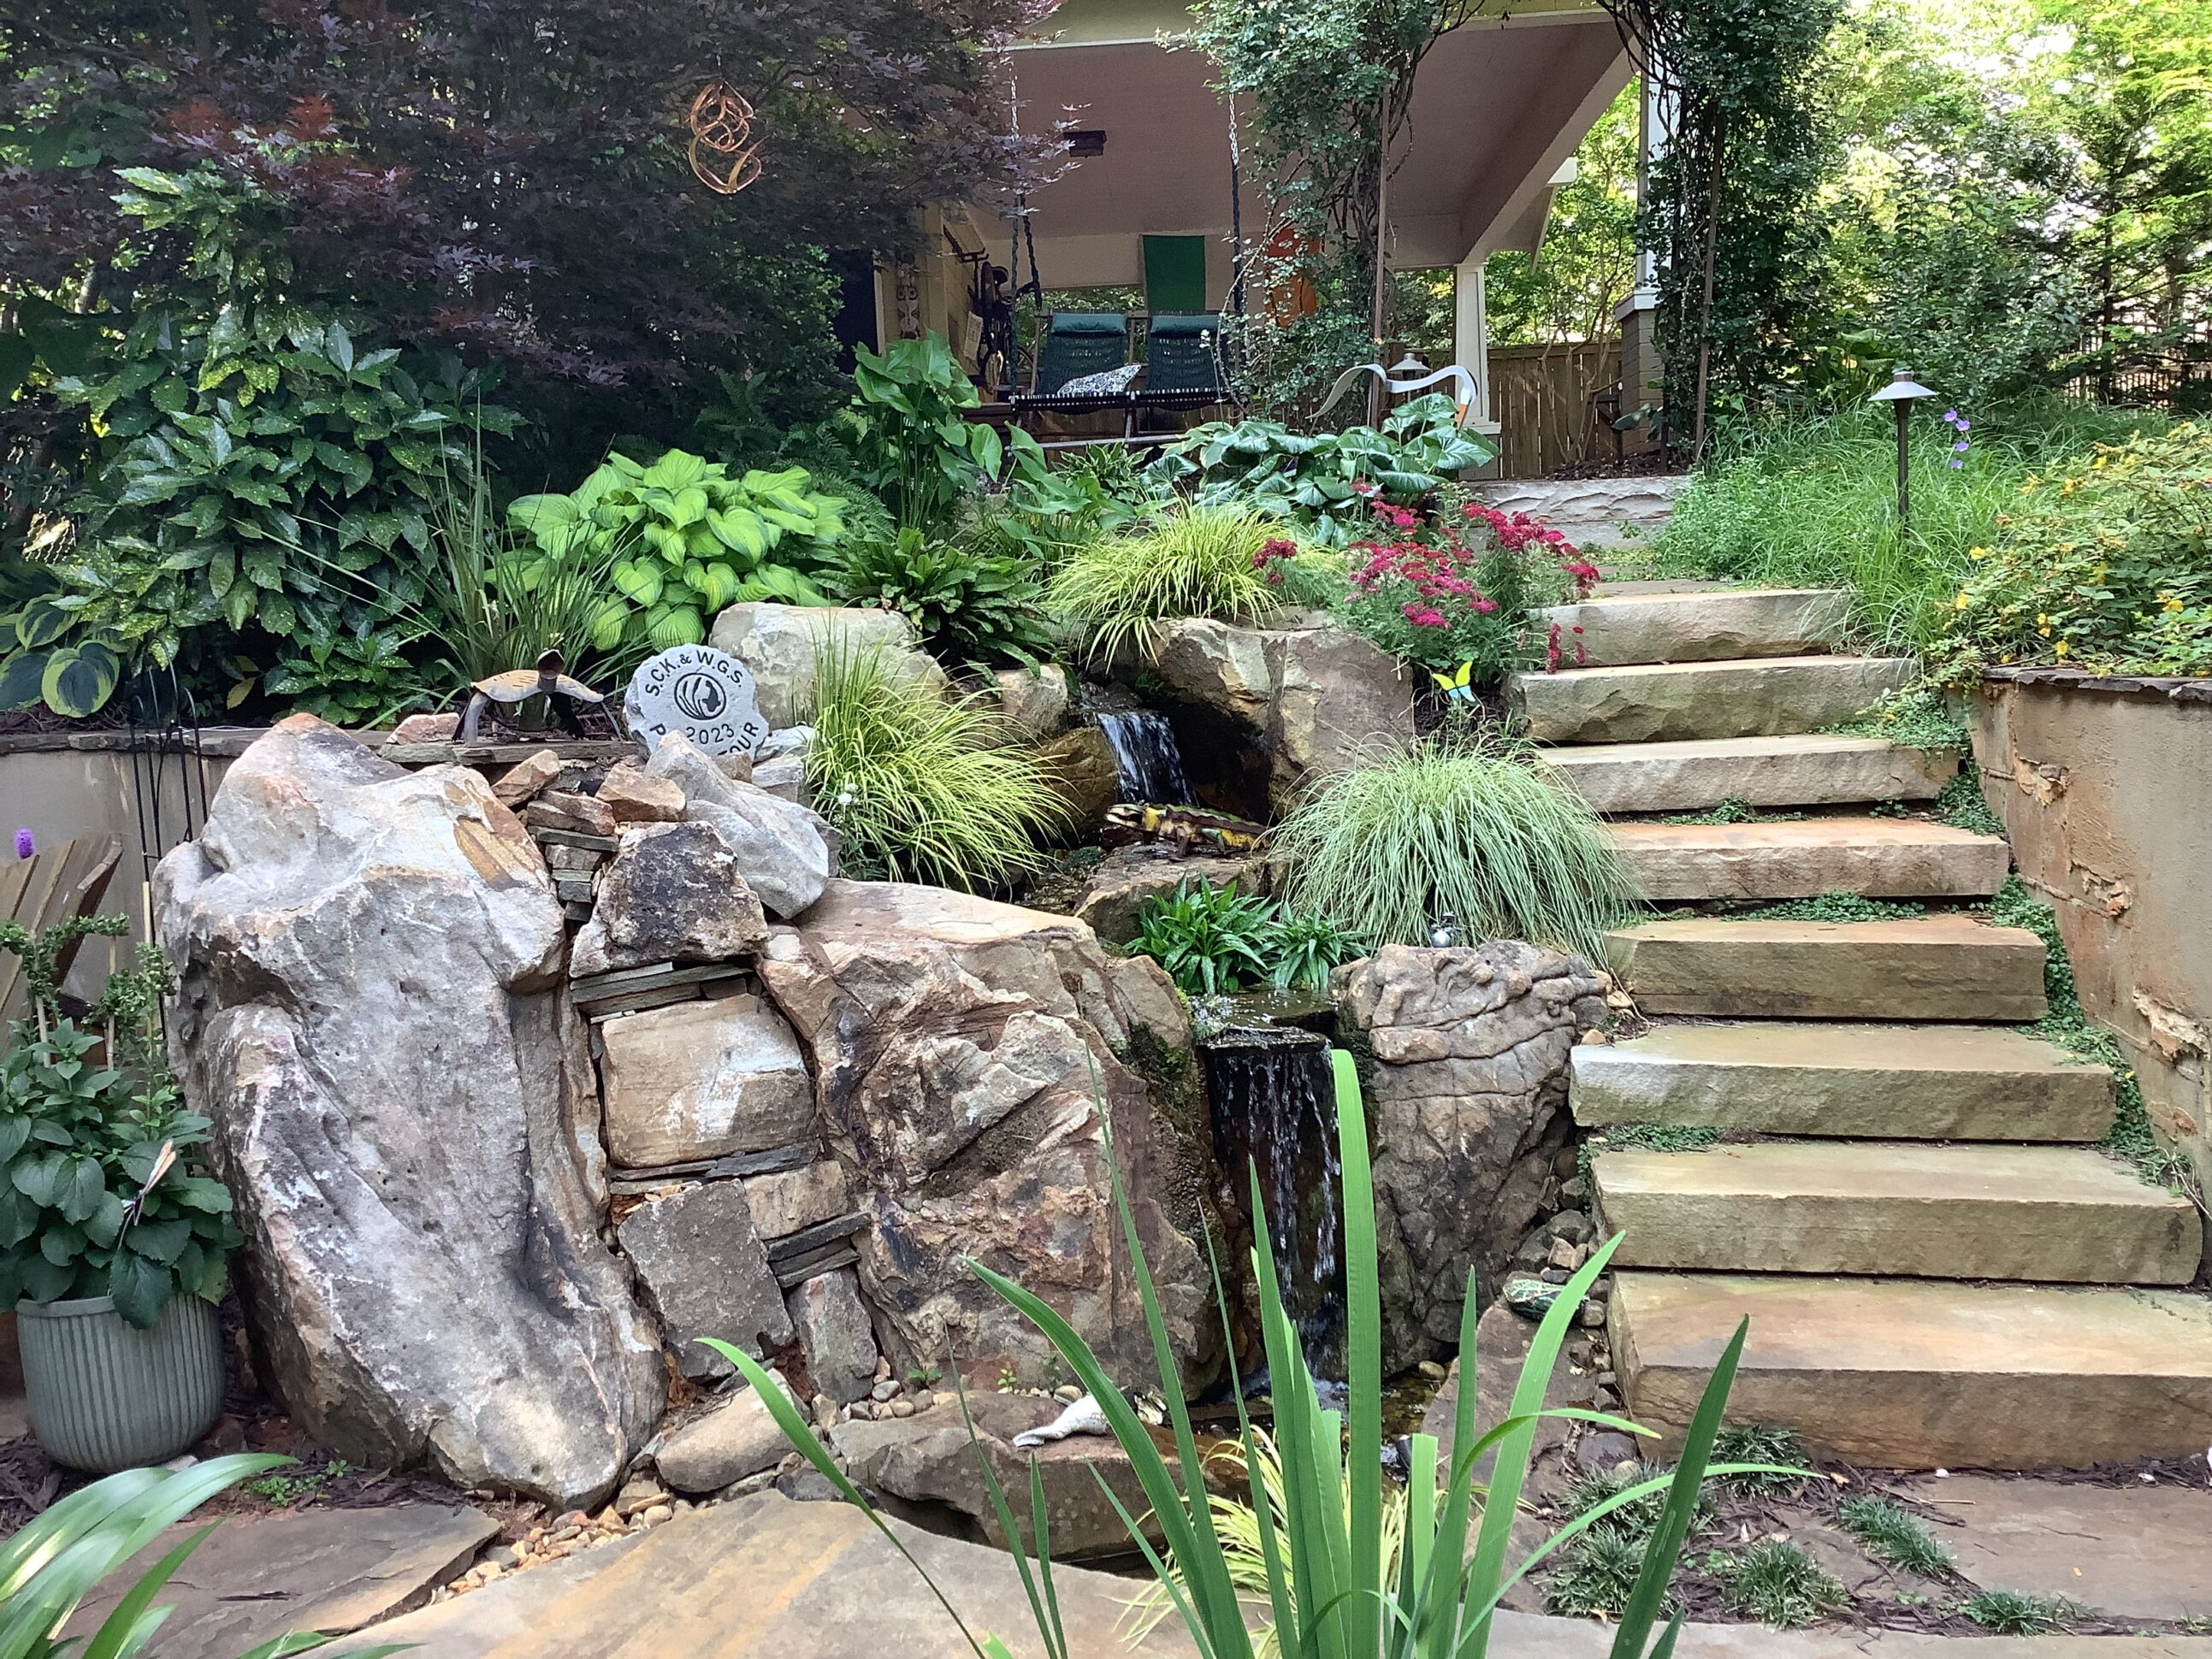 A garden with rocks and stairs leading to the house.